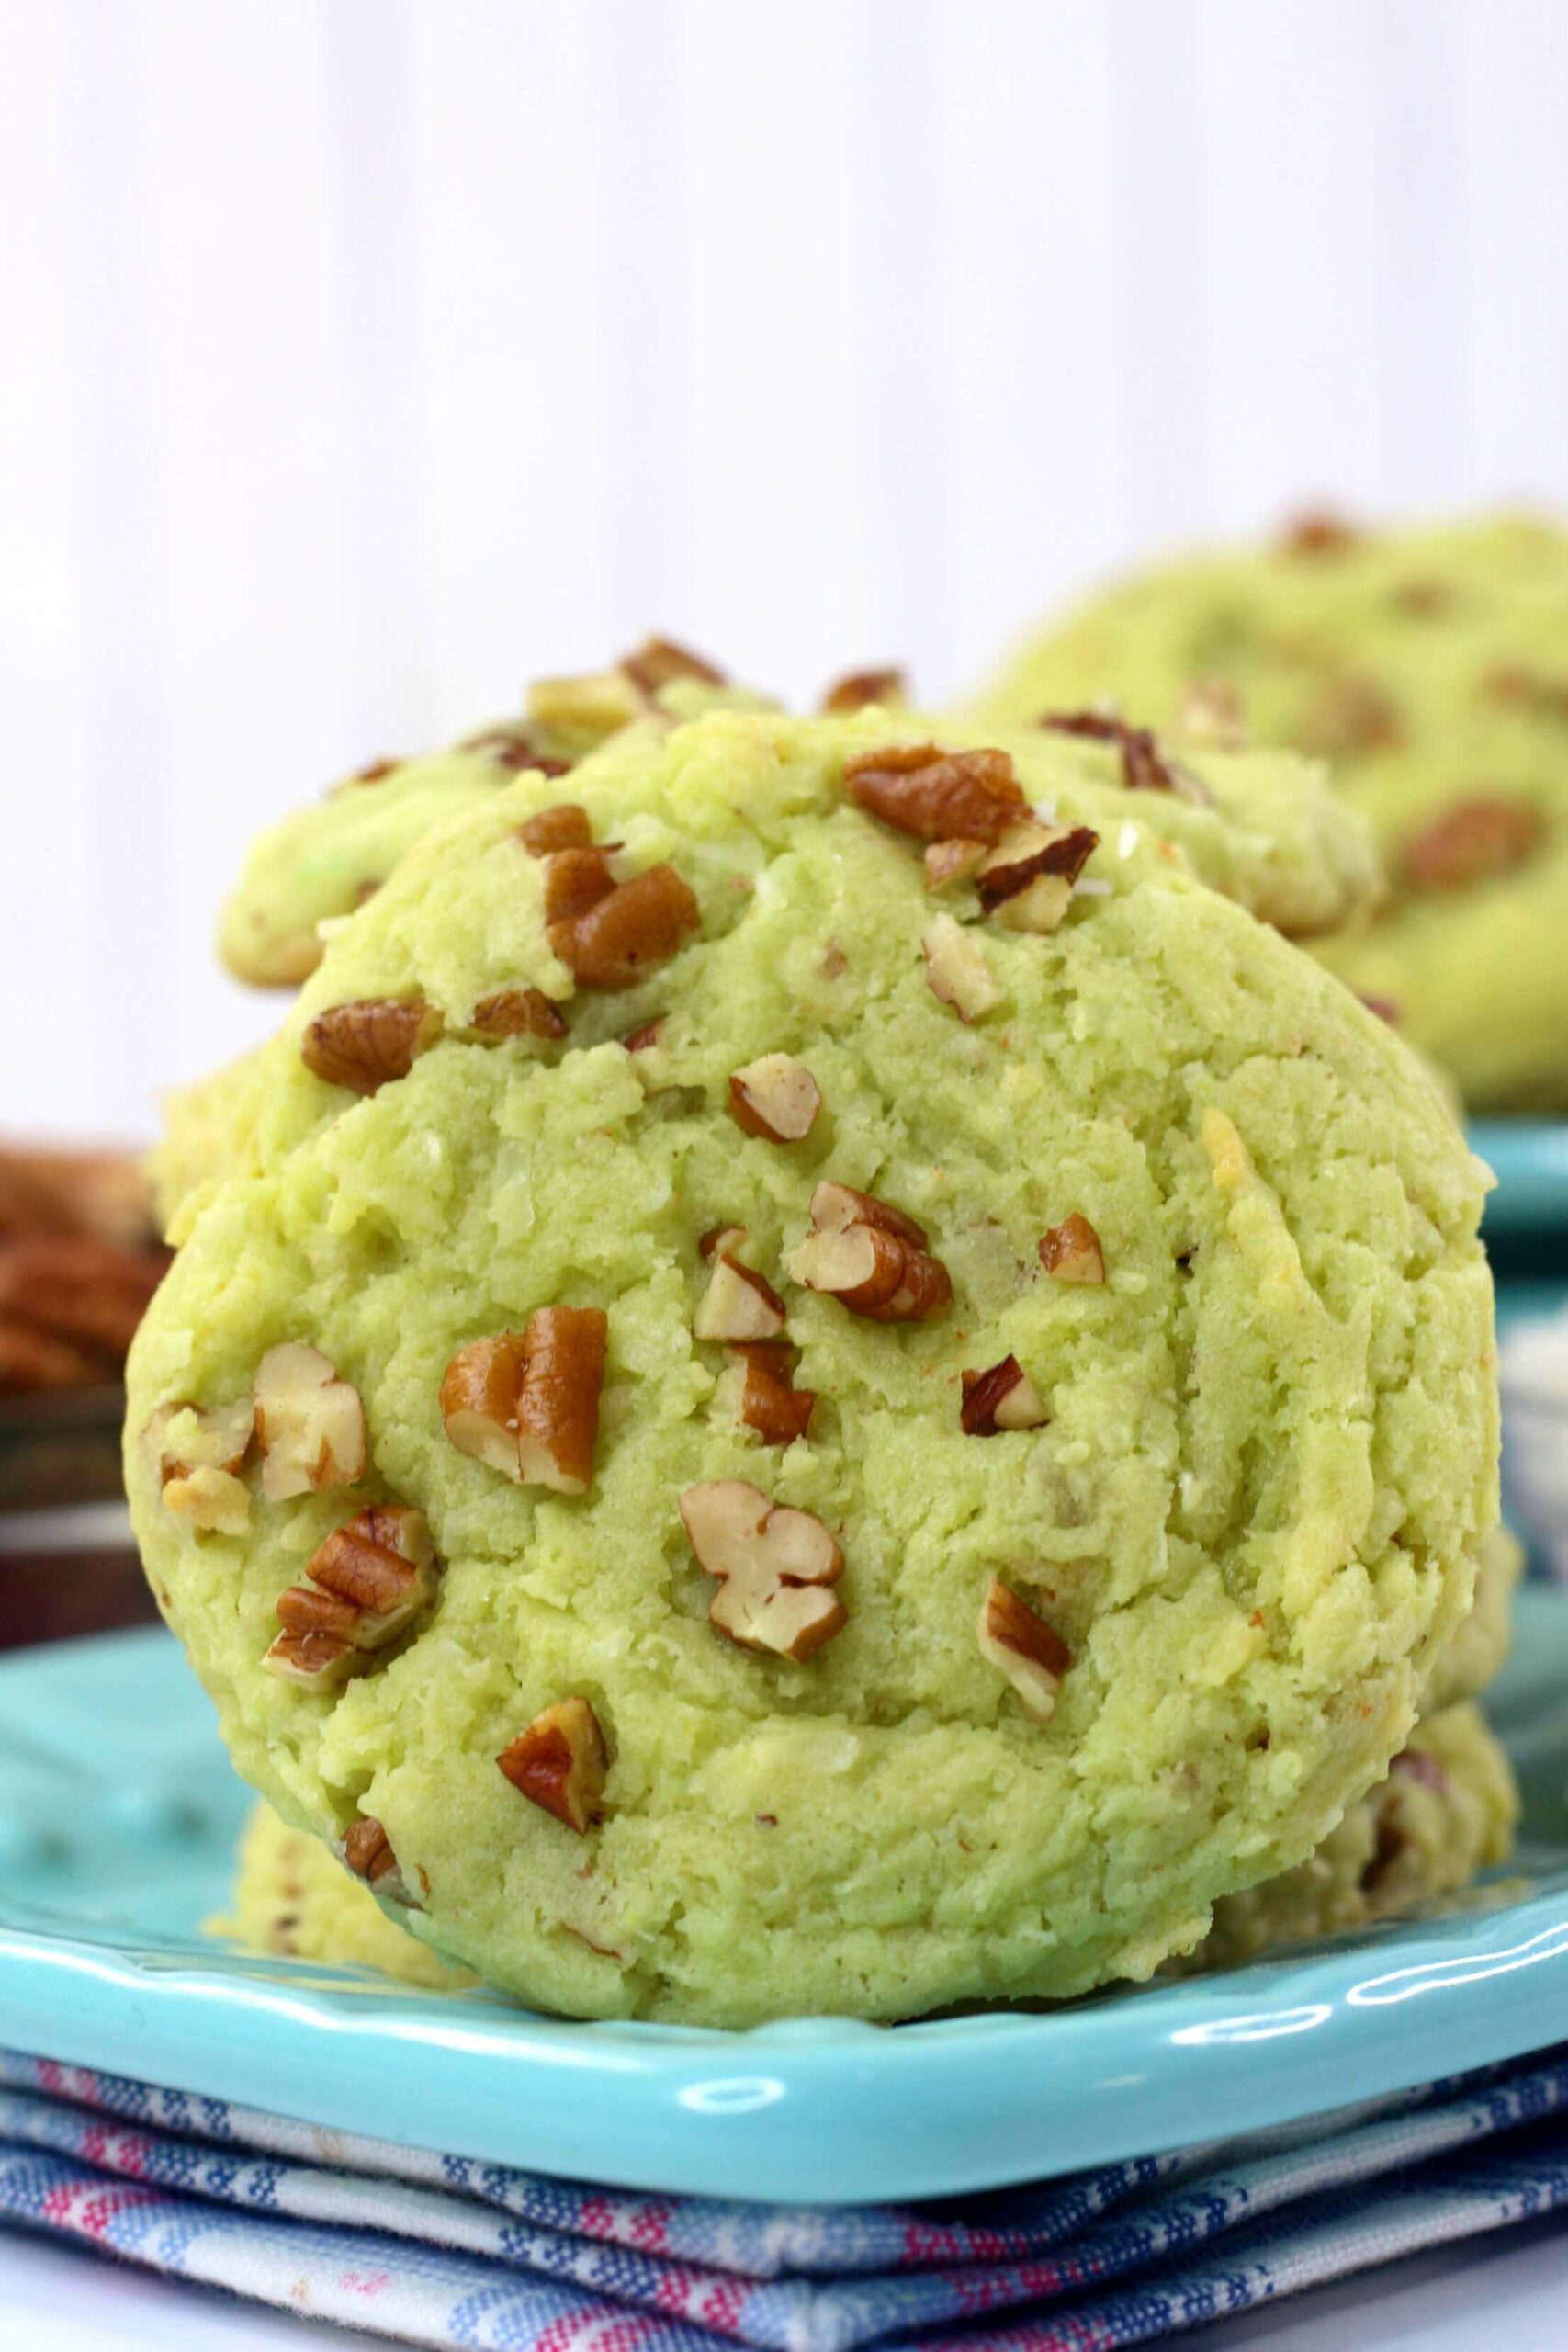 A side view of the green cookie with nuts.